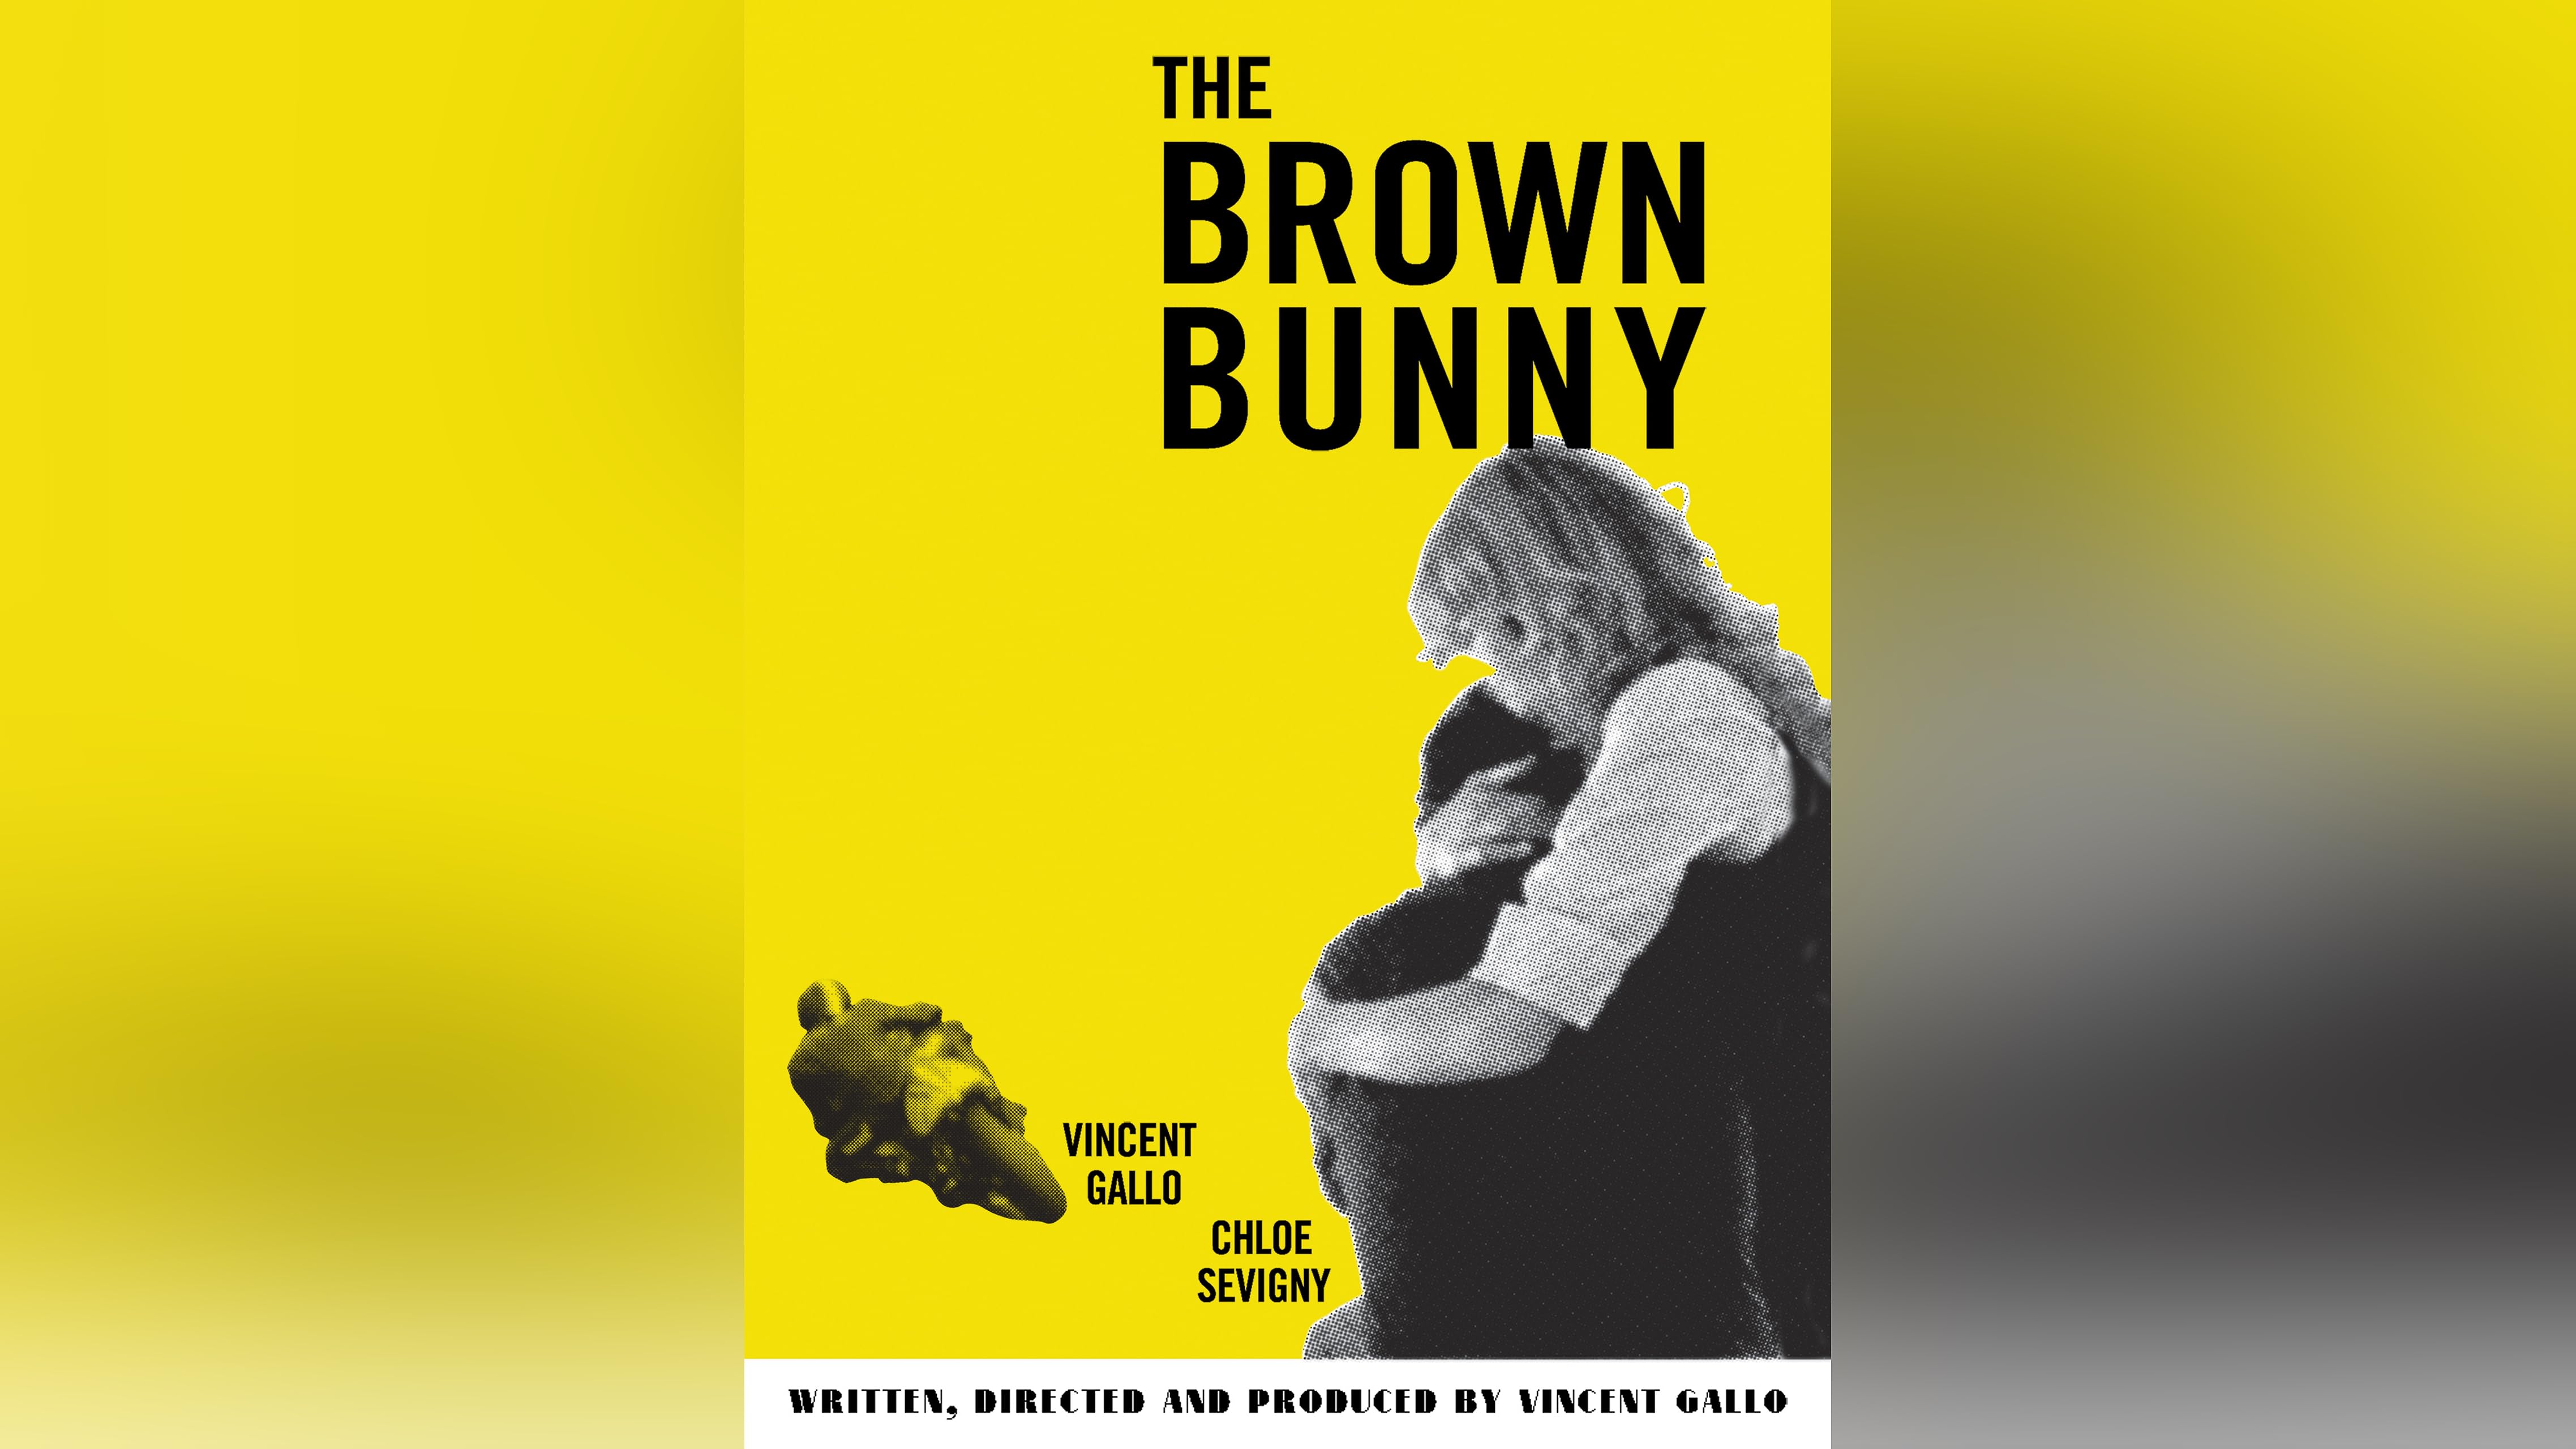 calissta moran recommends the brown bunny stream pic